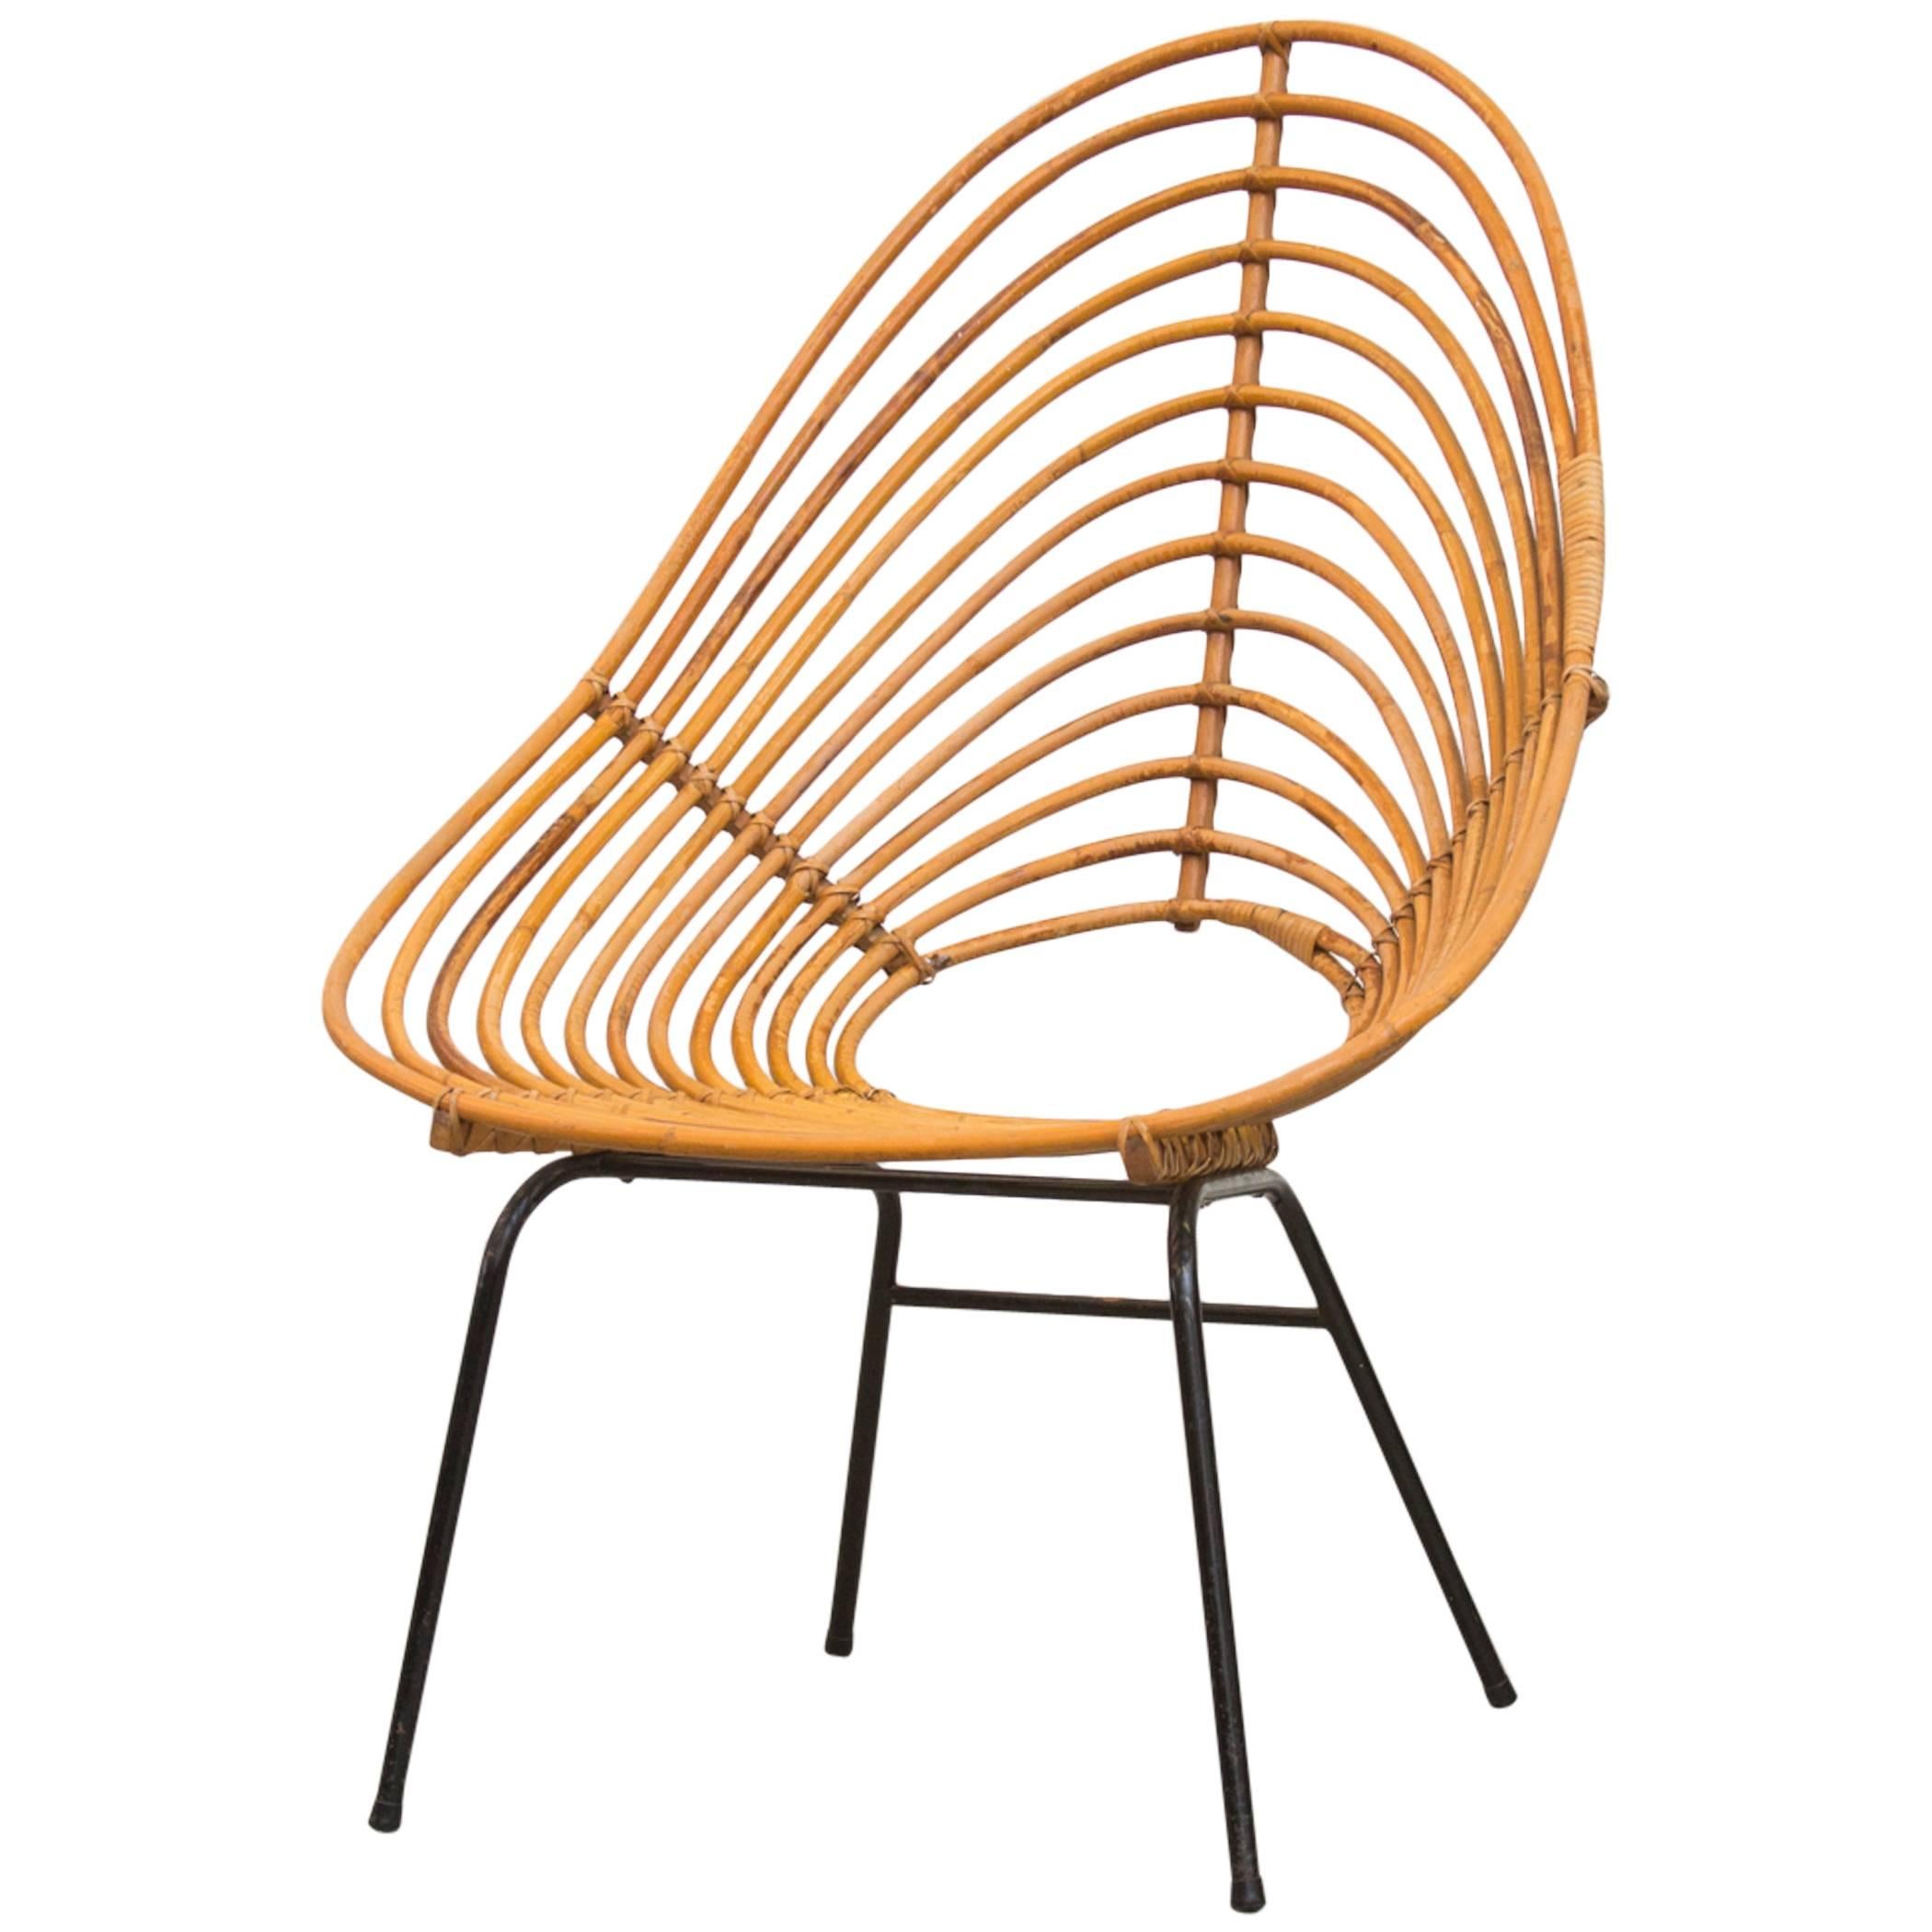 Onion Skin Patterned Tall Bamboo Lounge Chair